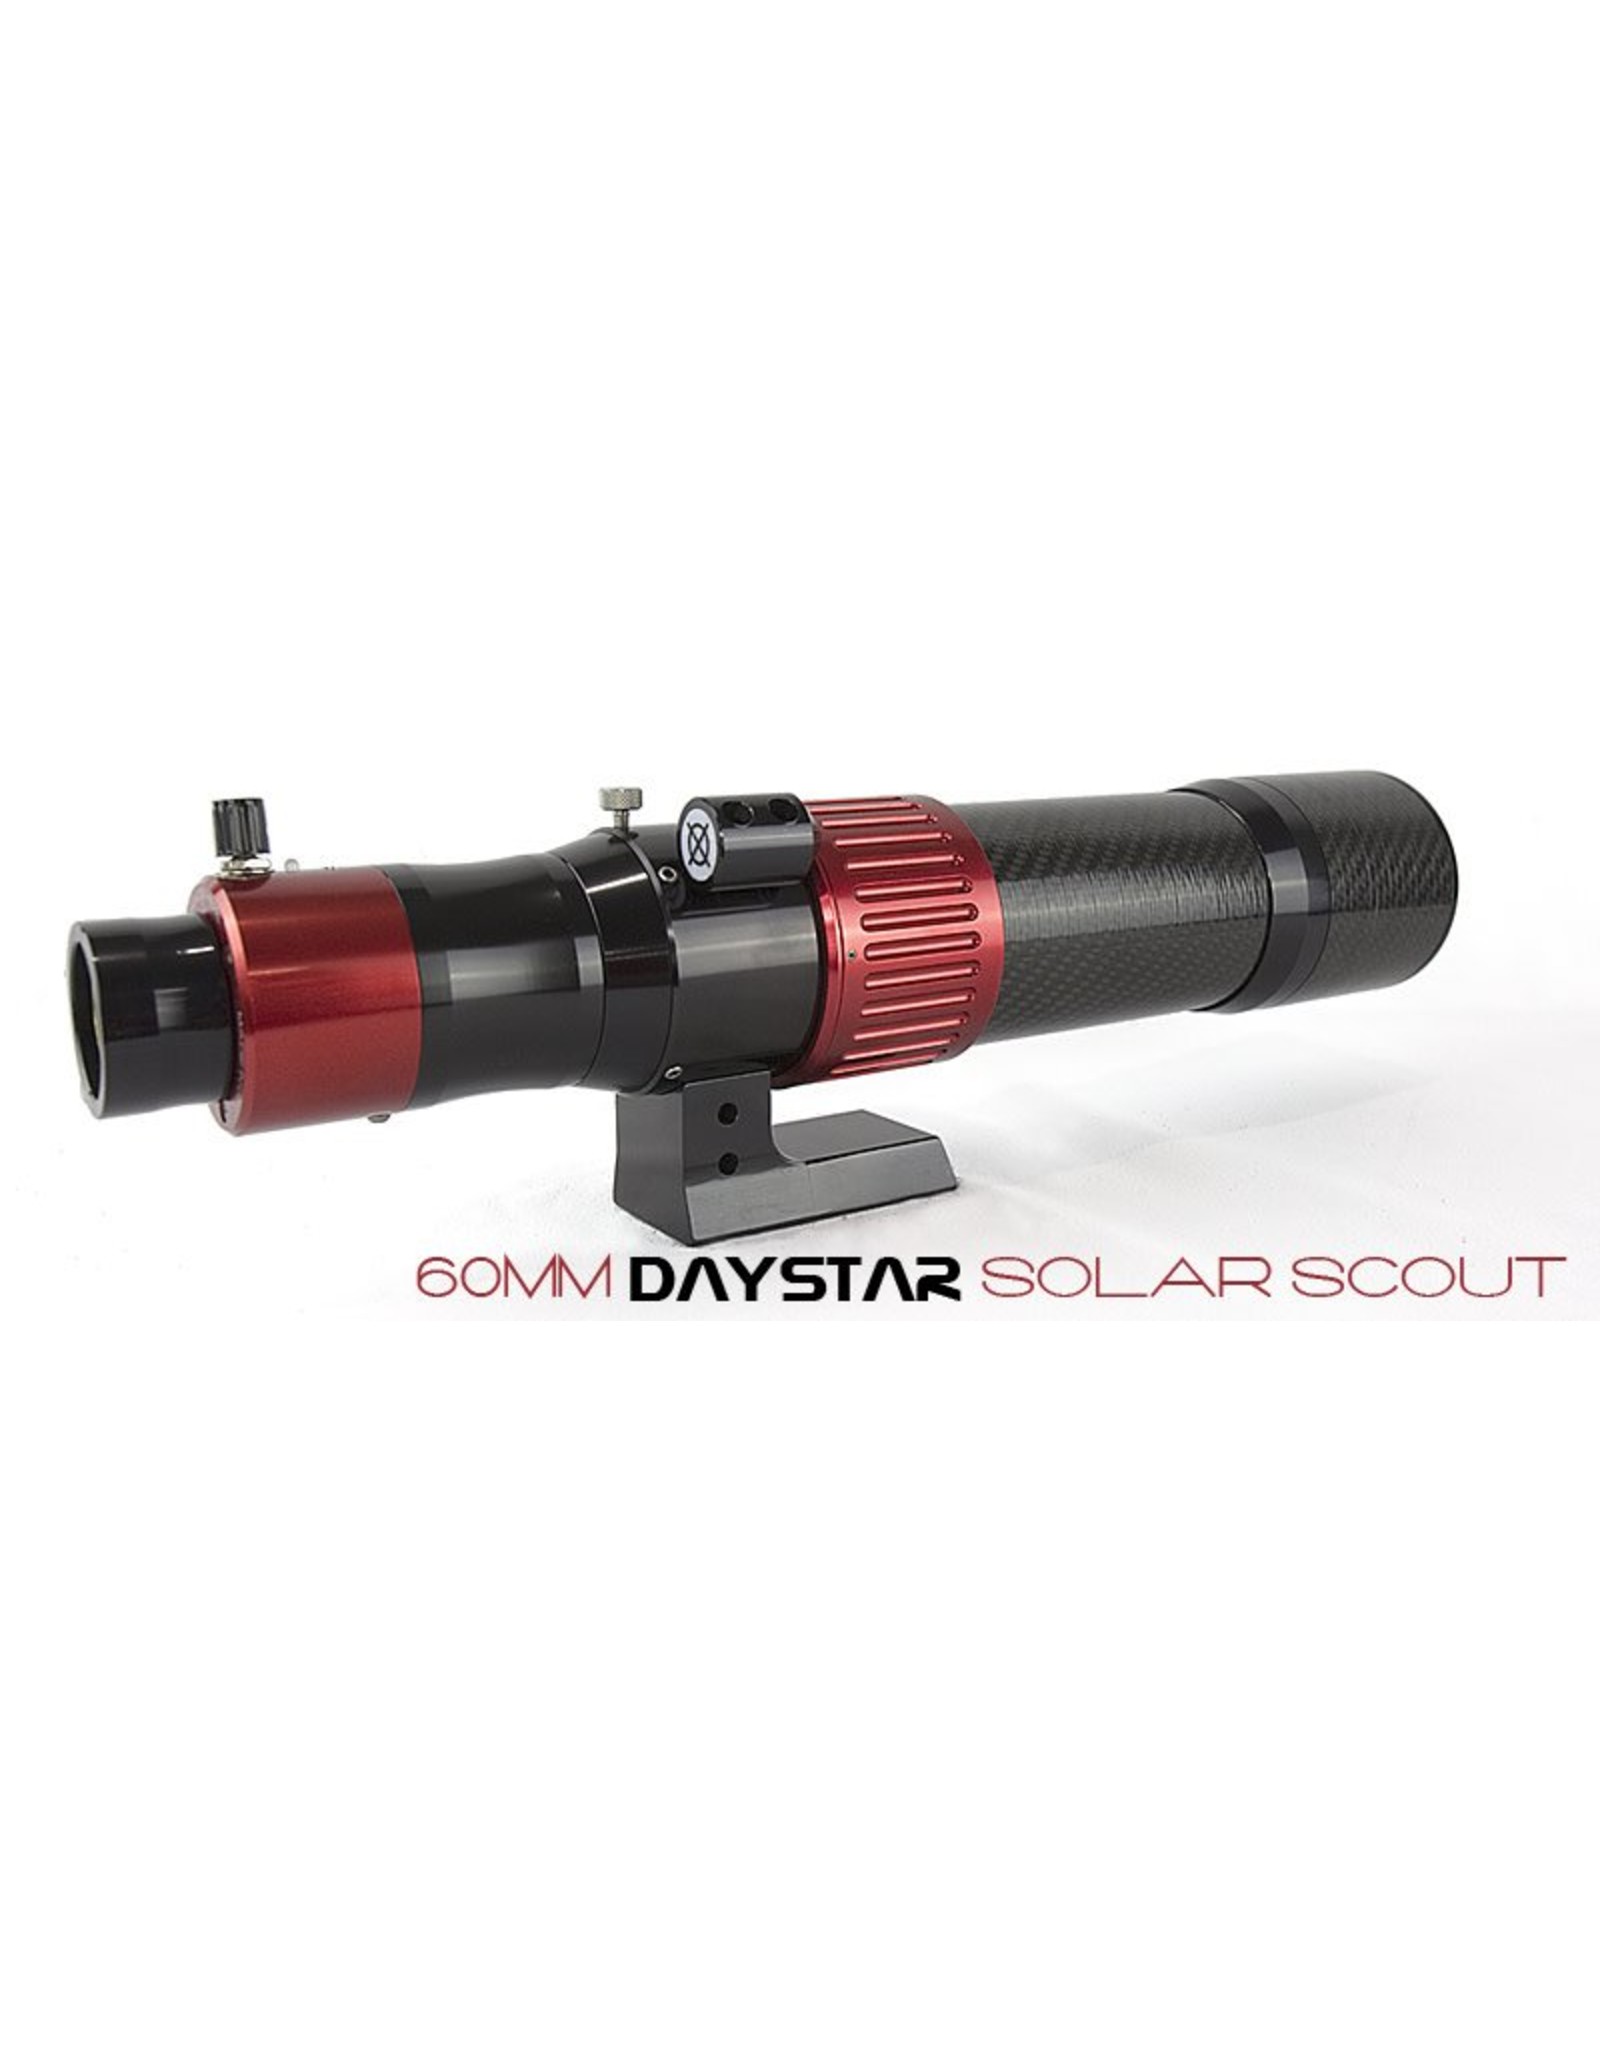 DayStar Filters Solar Scout 60mm f/15.5 H-alpha Achro Solar Telescope (available in Chromosphere or Prominence Models)